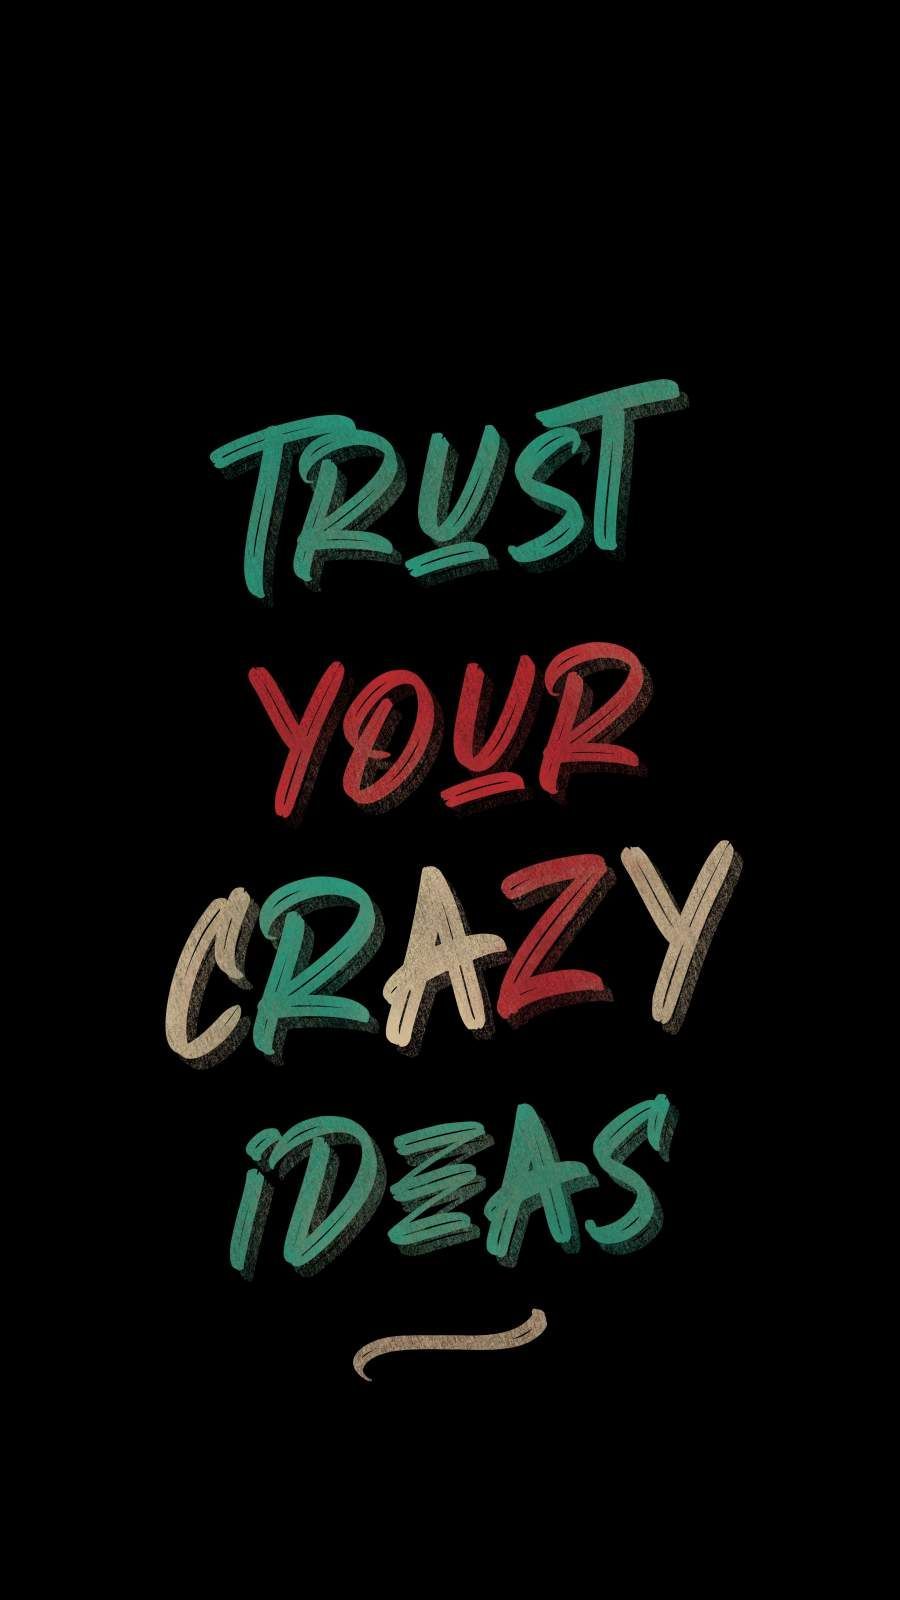 Trust Your Crazy Ideas iPhone Wallpaper. Wallpaper quotes, Funky quotes, Friends quotes